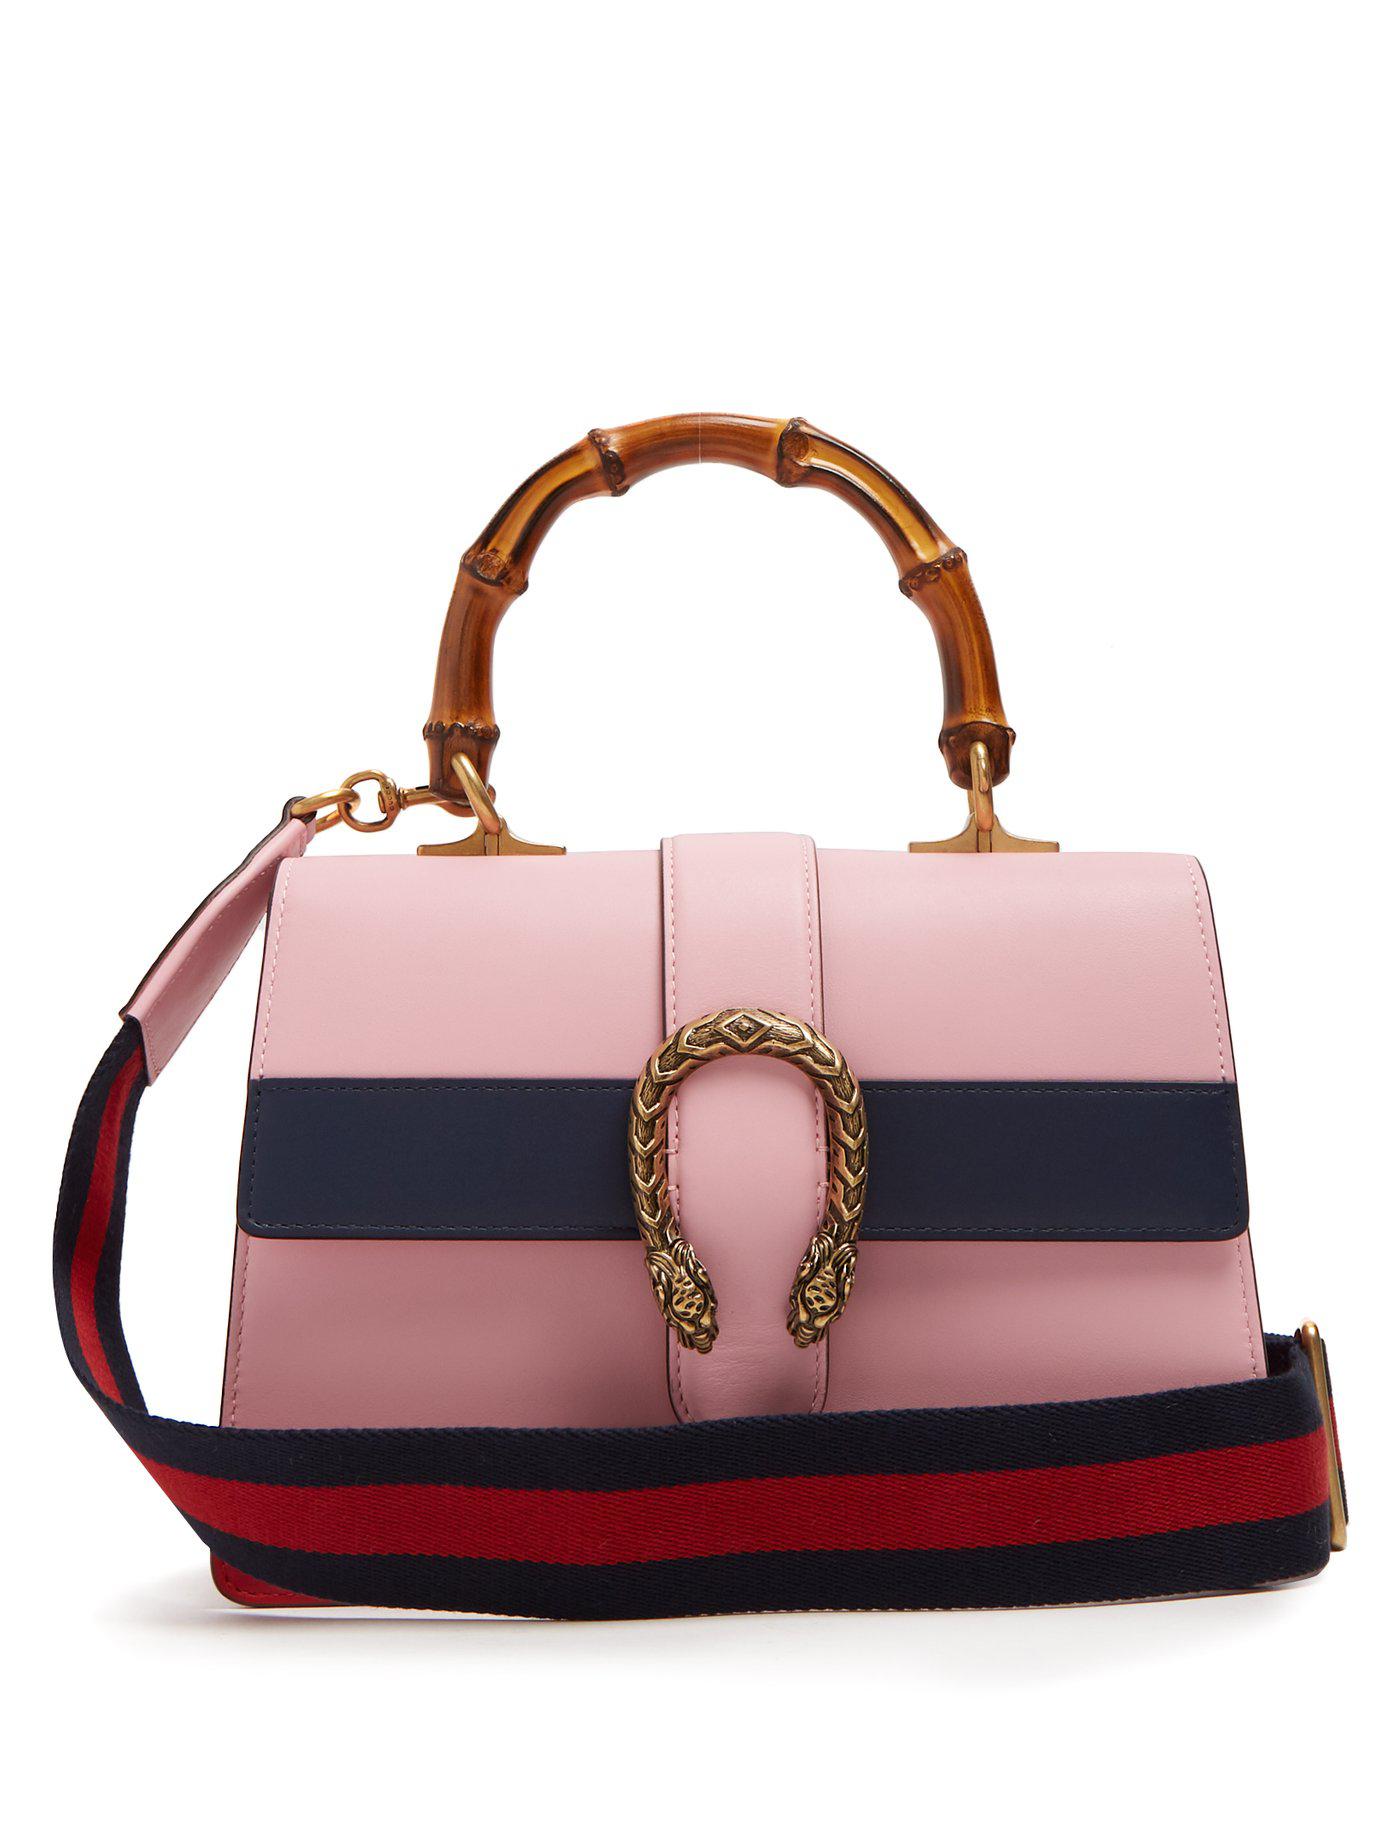 Gucci Leather Bamboo Dionysus Large Top Handle Bag (SHF-M0eZzm